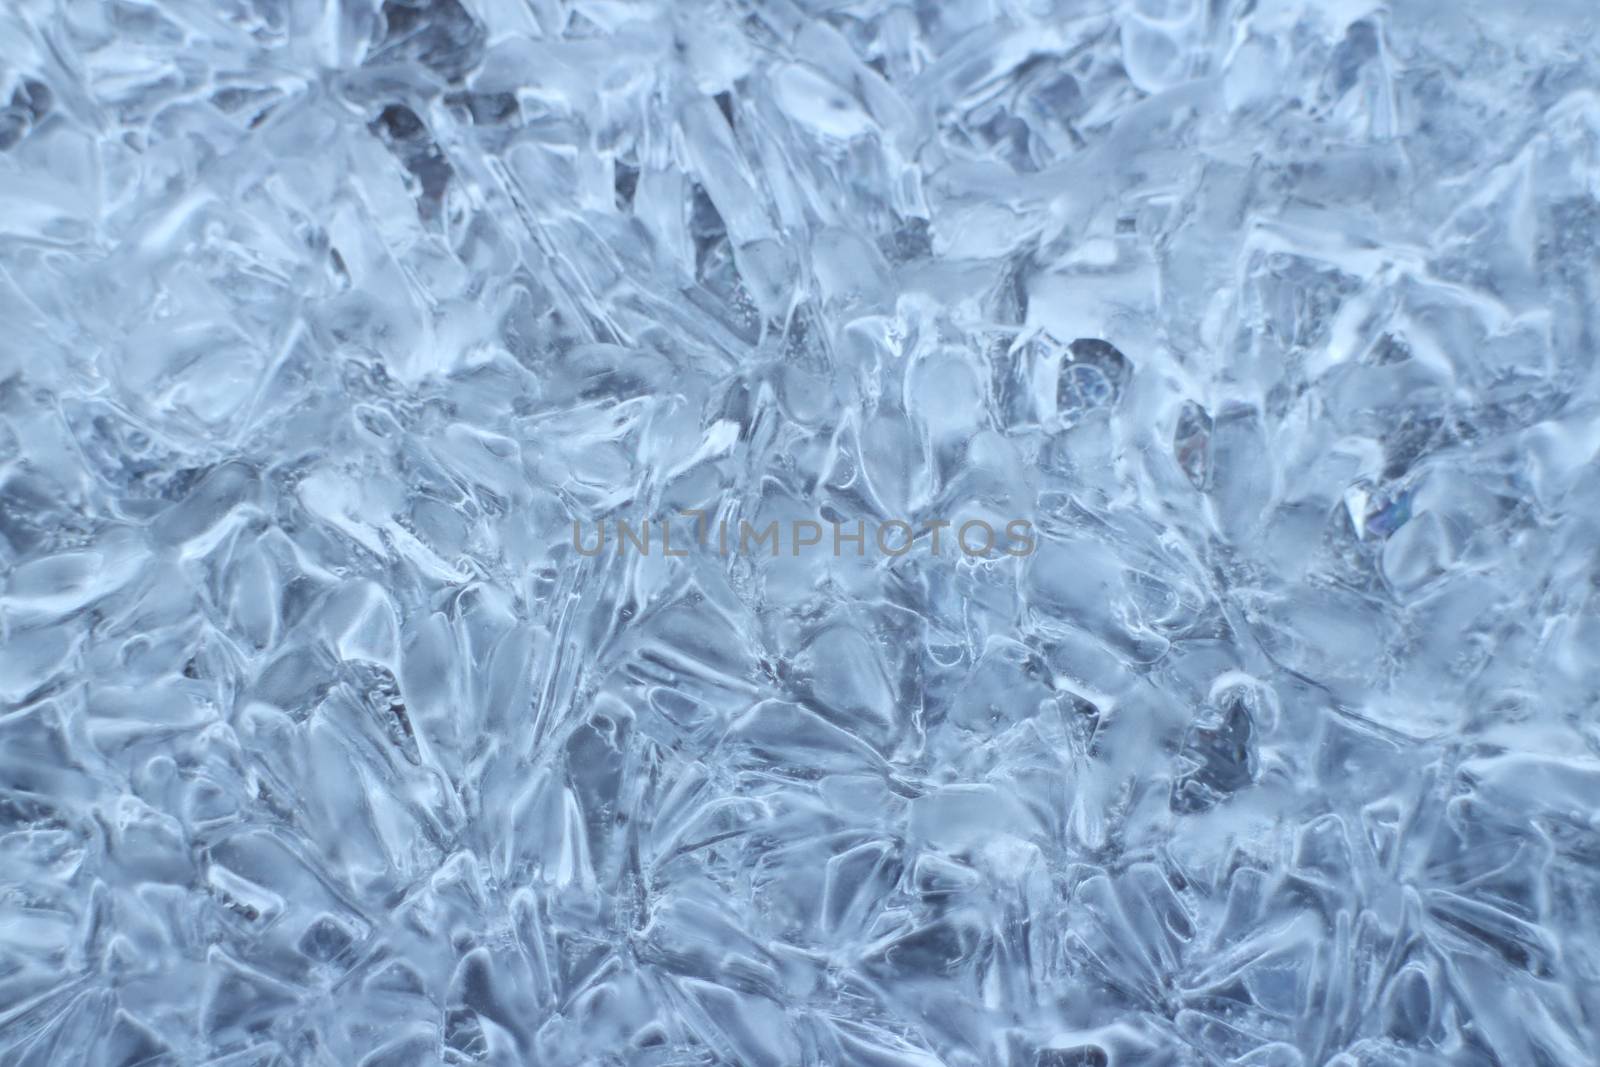 Large ice crystals frozen water, abstract pattern, background